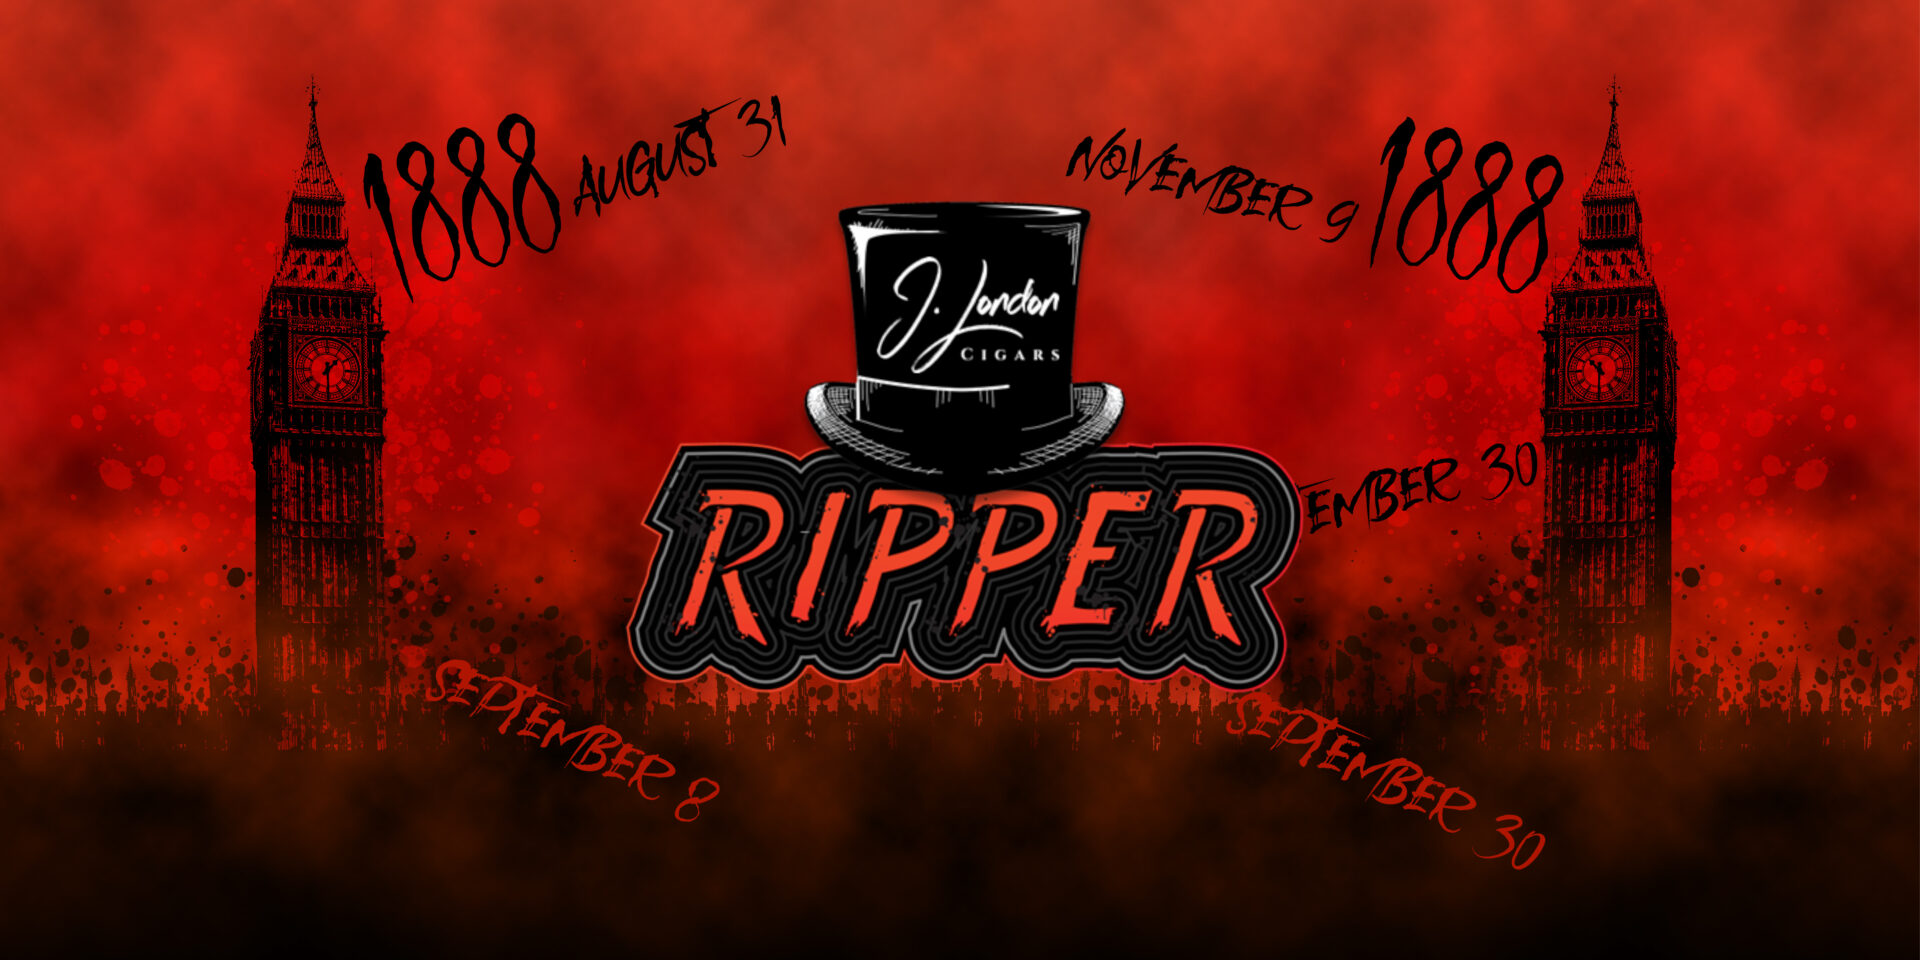 The Ripper Is Available